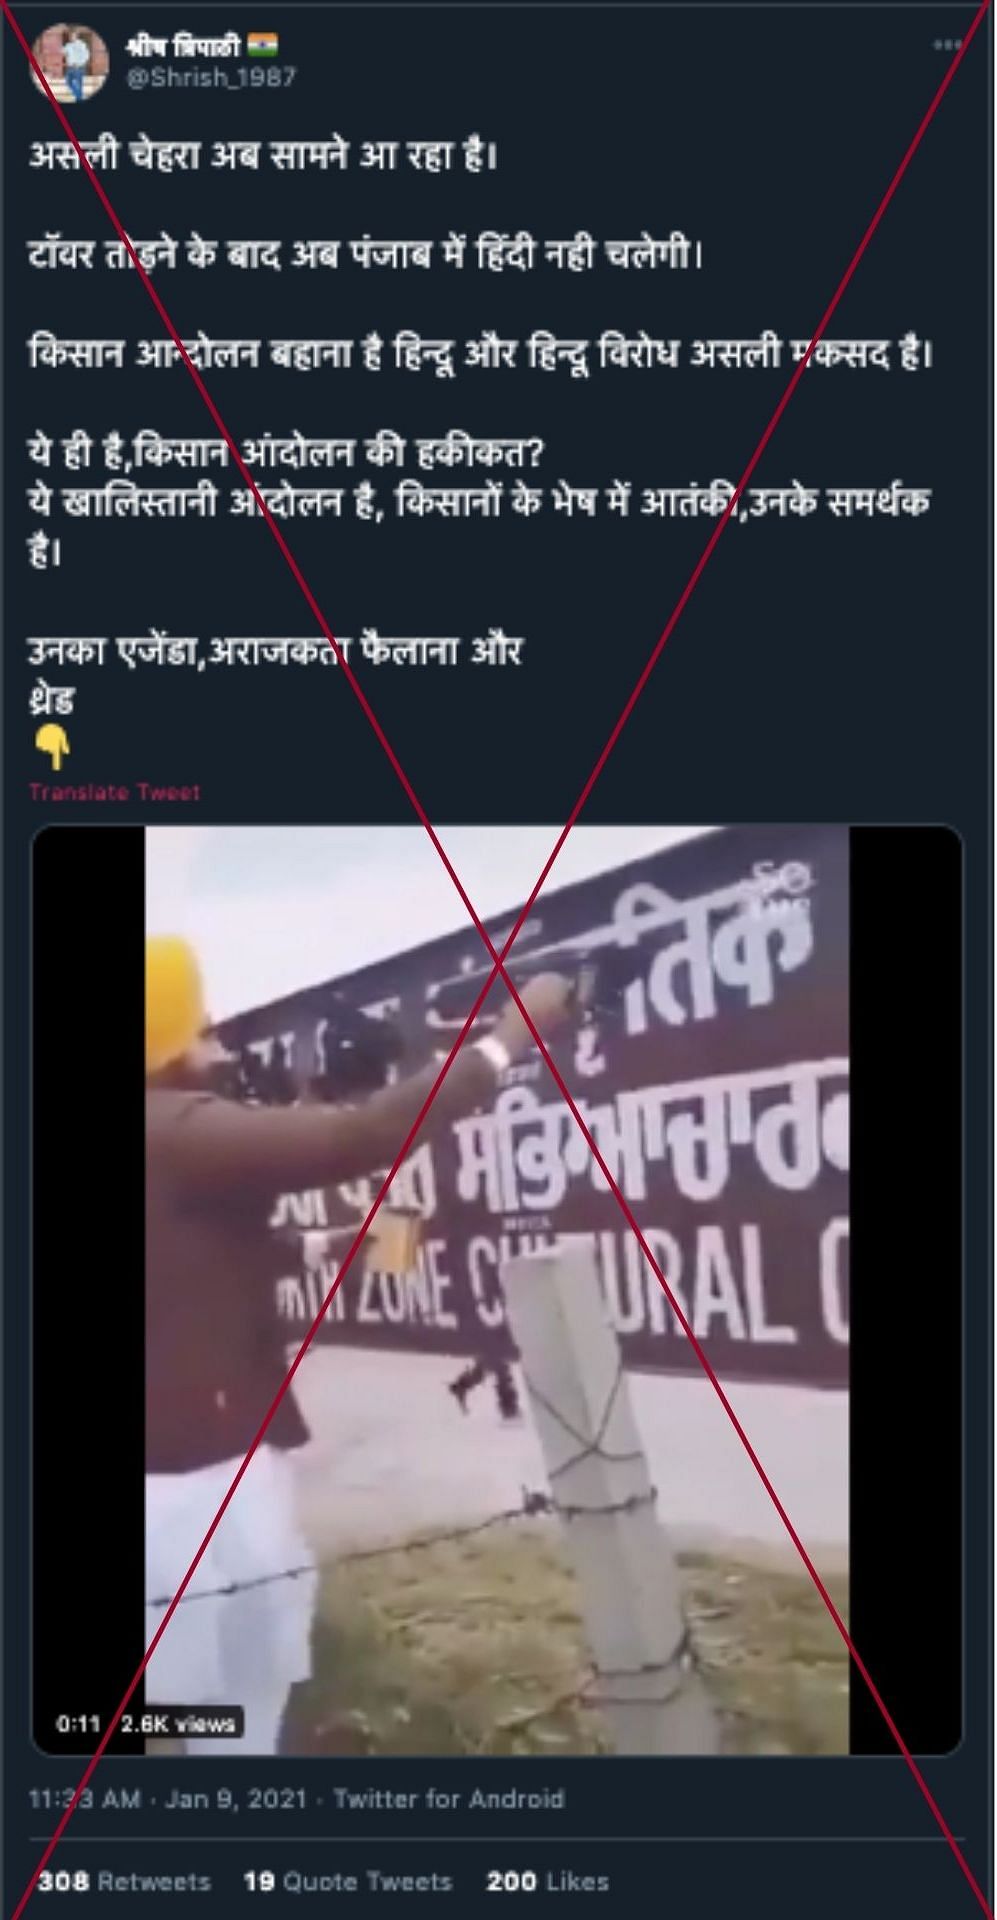 The videos and images in circulation are from unrelated events and have no connection with the farmers’ protests.